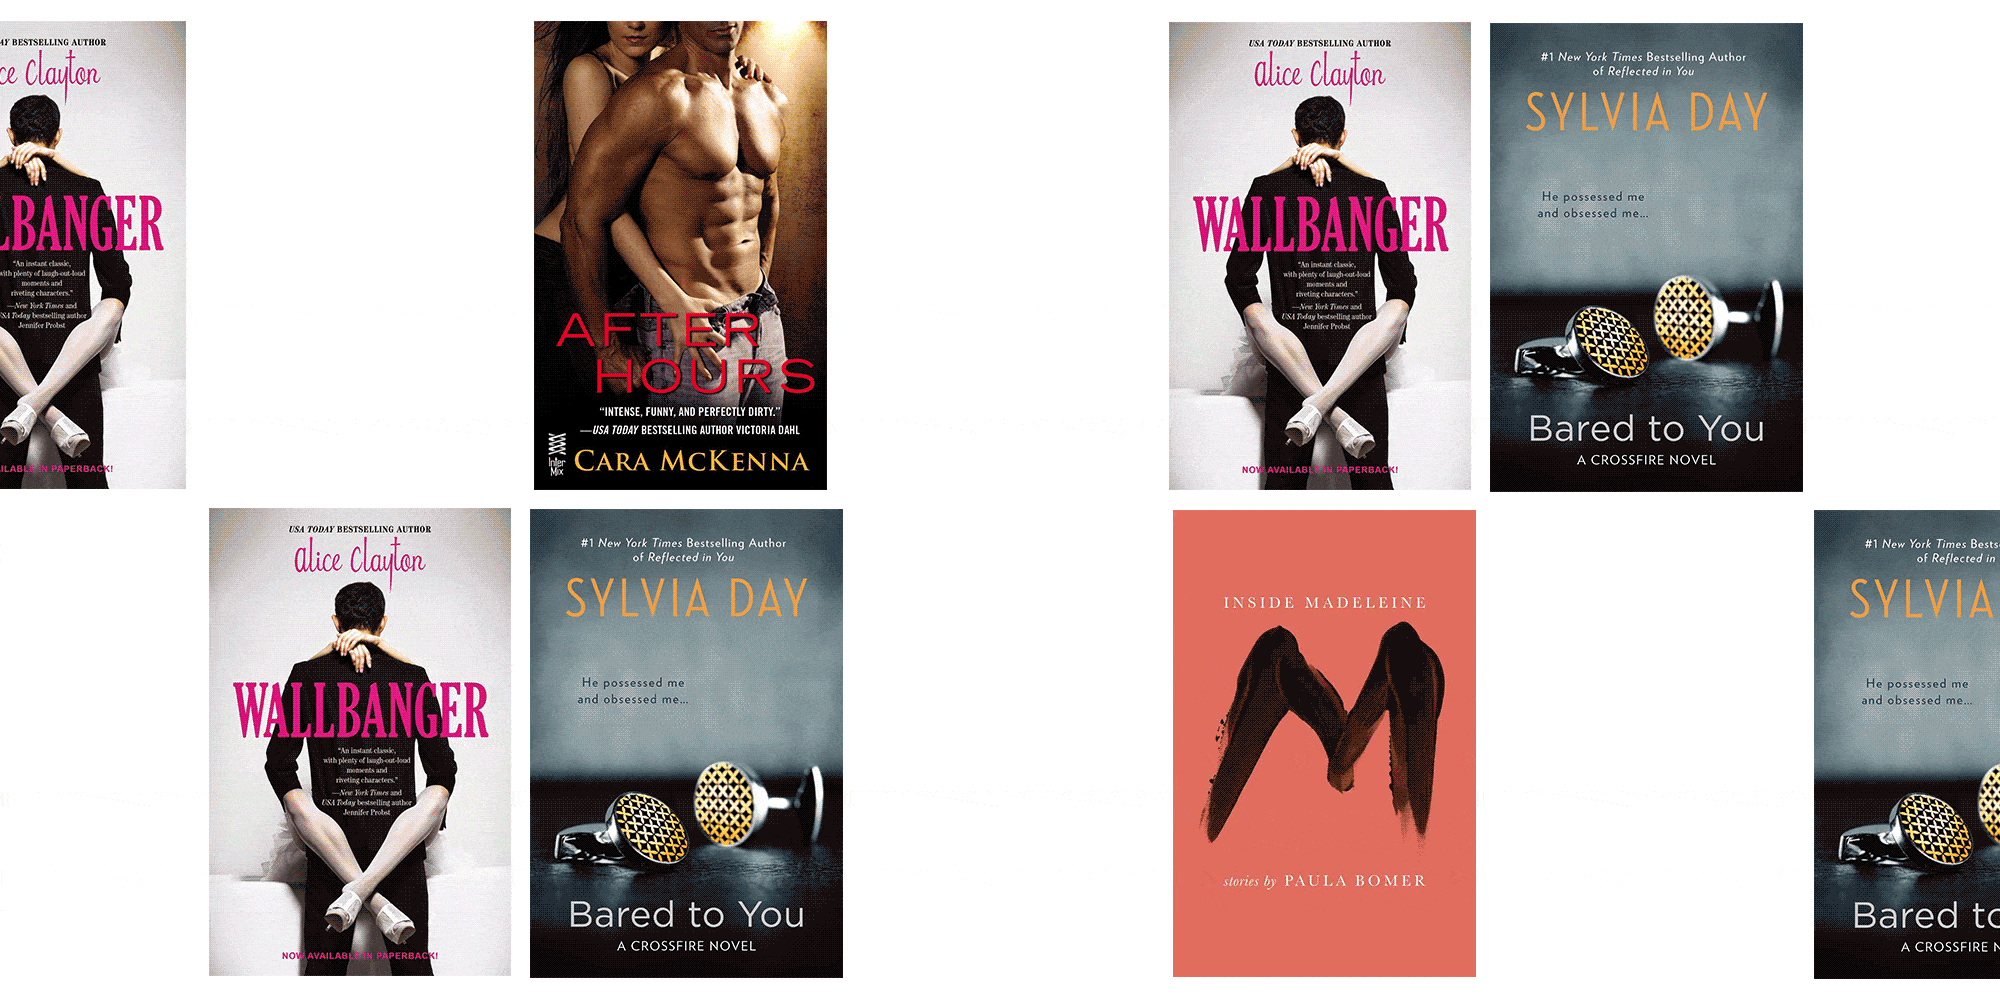 Erotic Novels Online - 15 Best Erotic Novels for Women - Sexy Books to Read After Fifty Shades